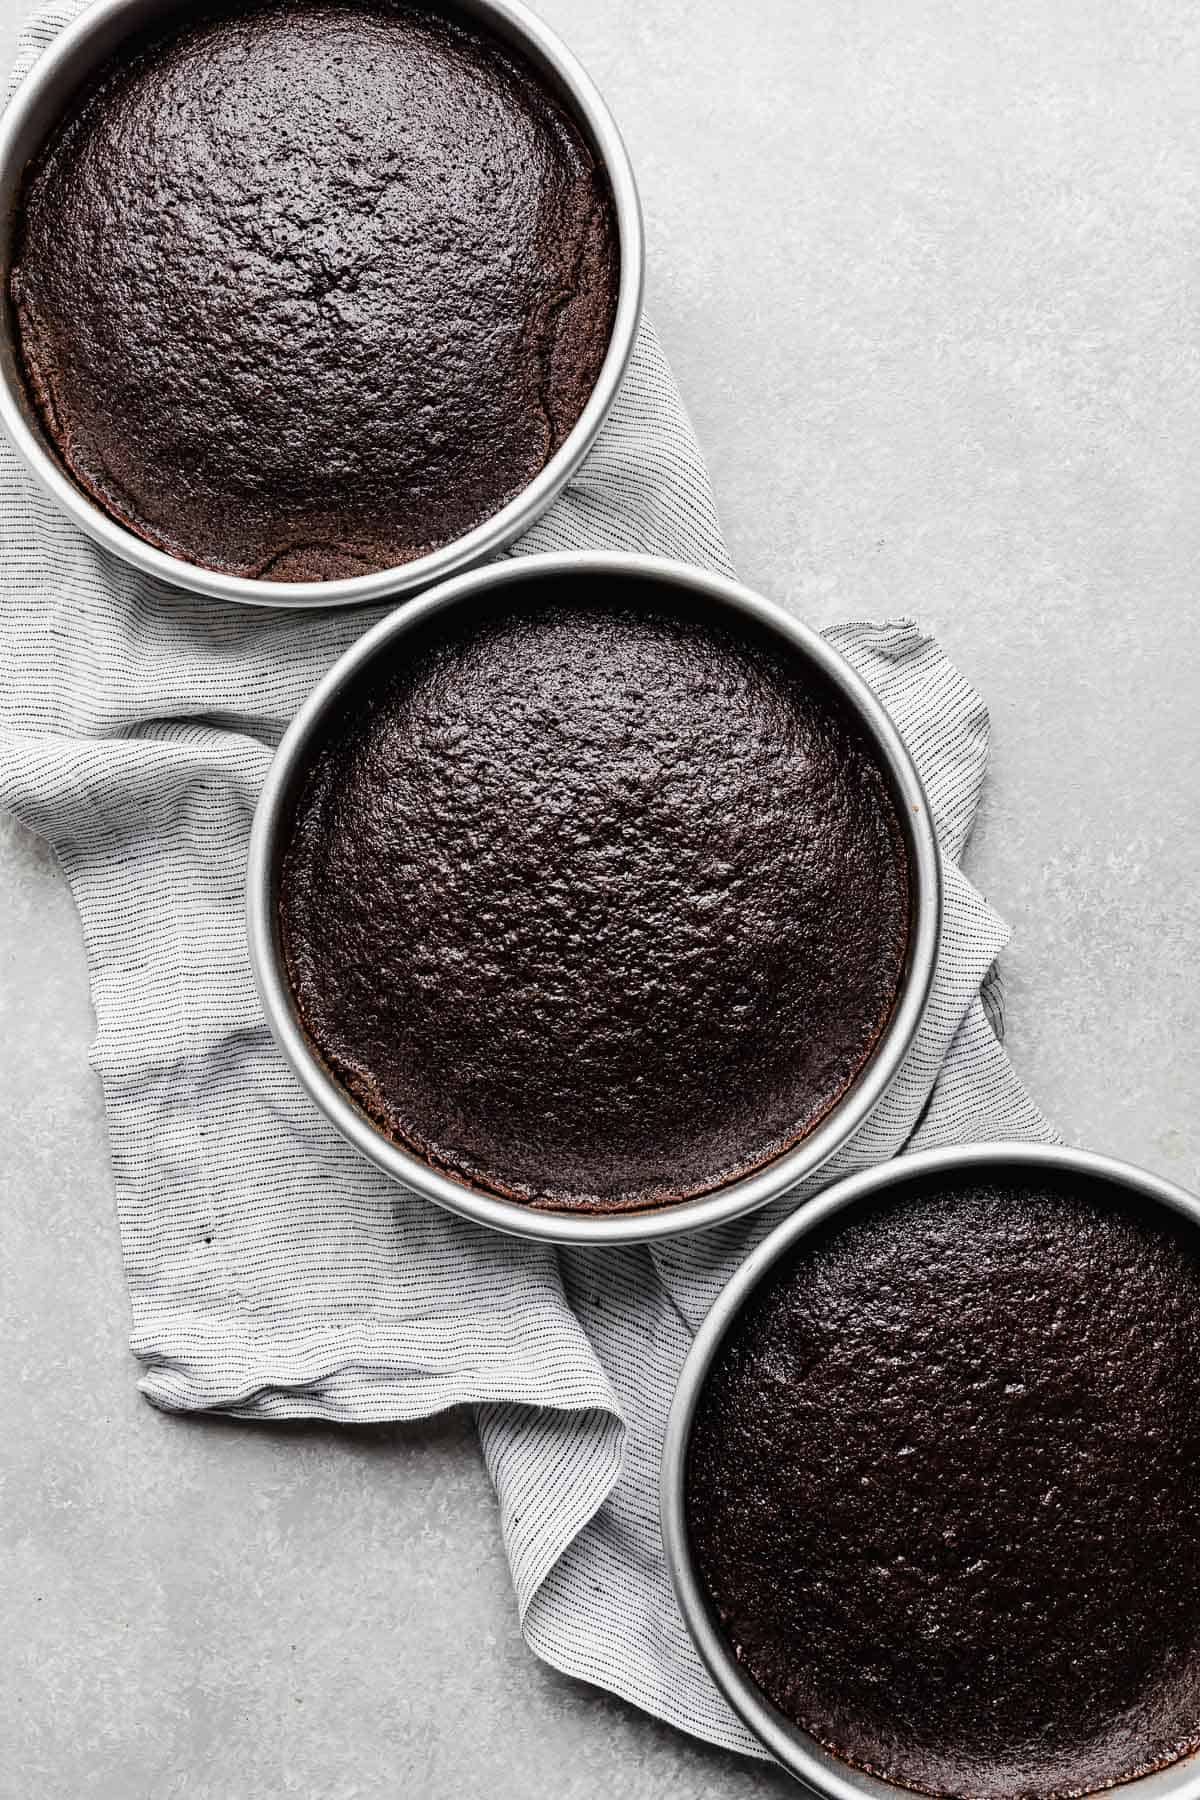 Three round cake pans with baked chocolate cake rounds in each pan.